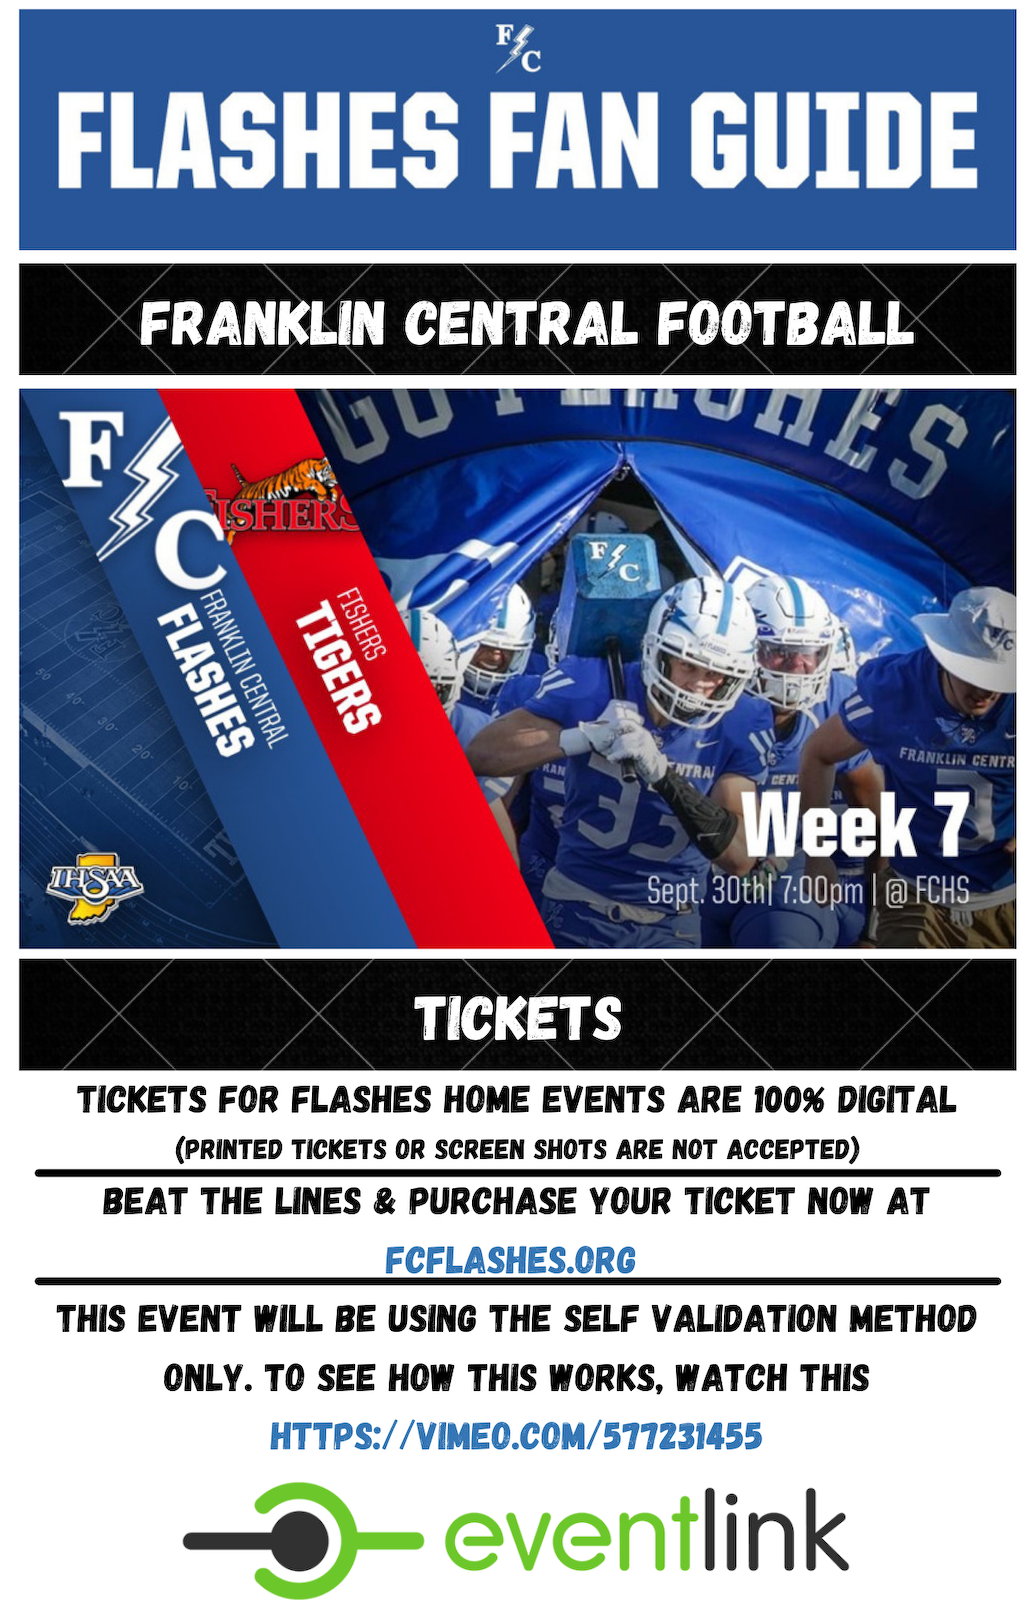 Flashes Football Week 7 Fan Guide! cover photo